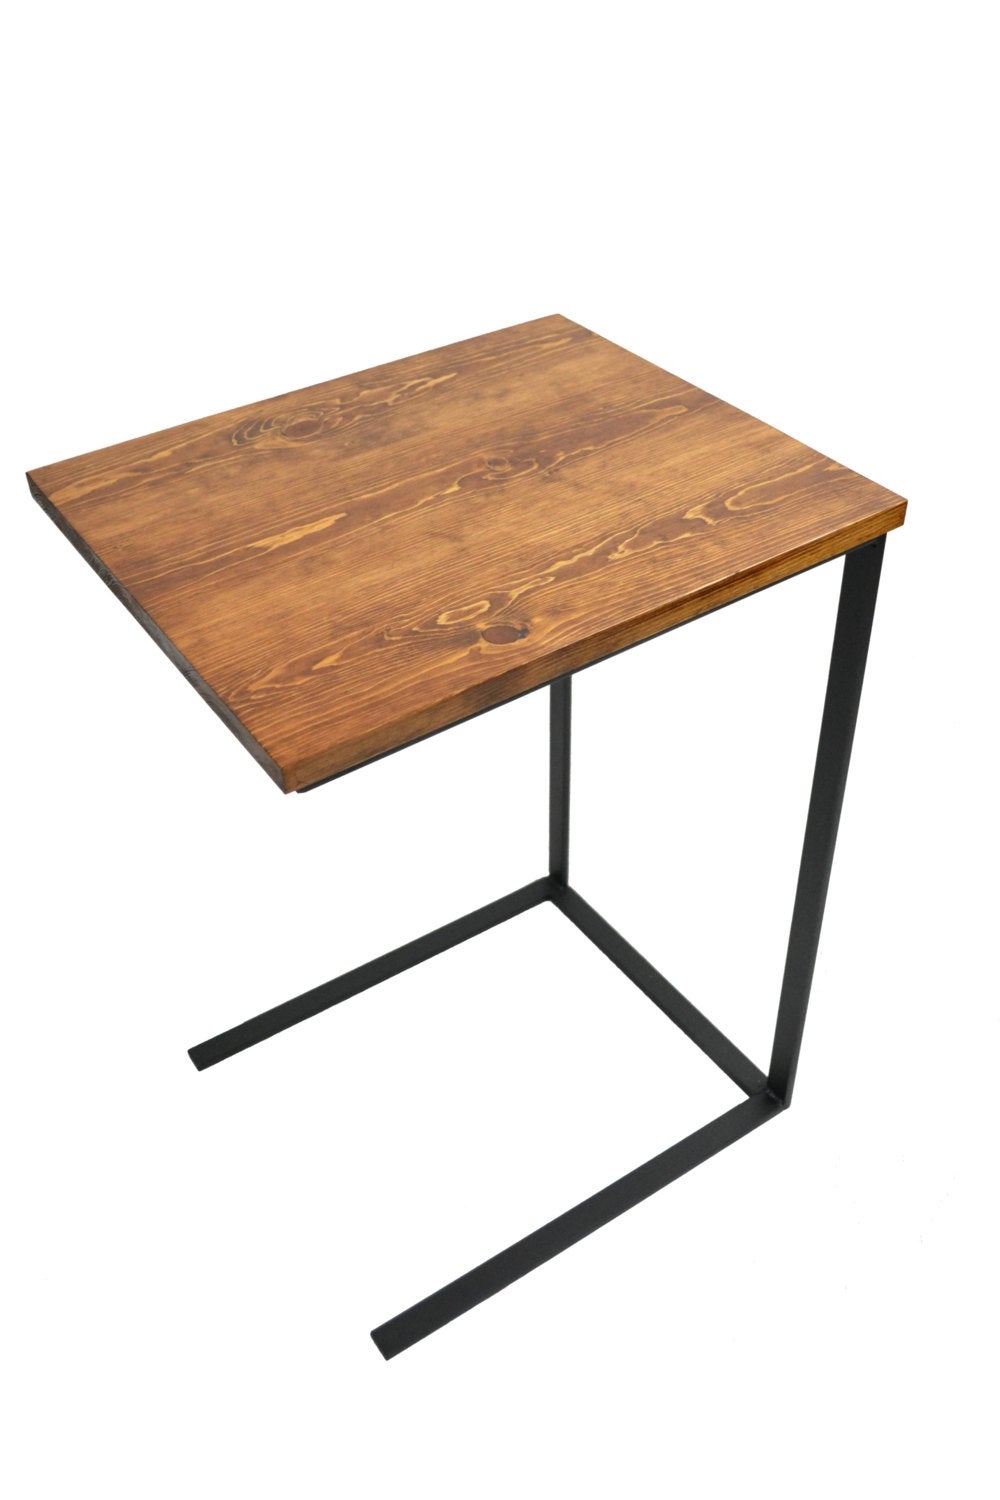 Tv tray table laptop desk c table side